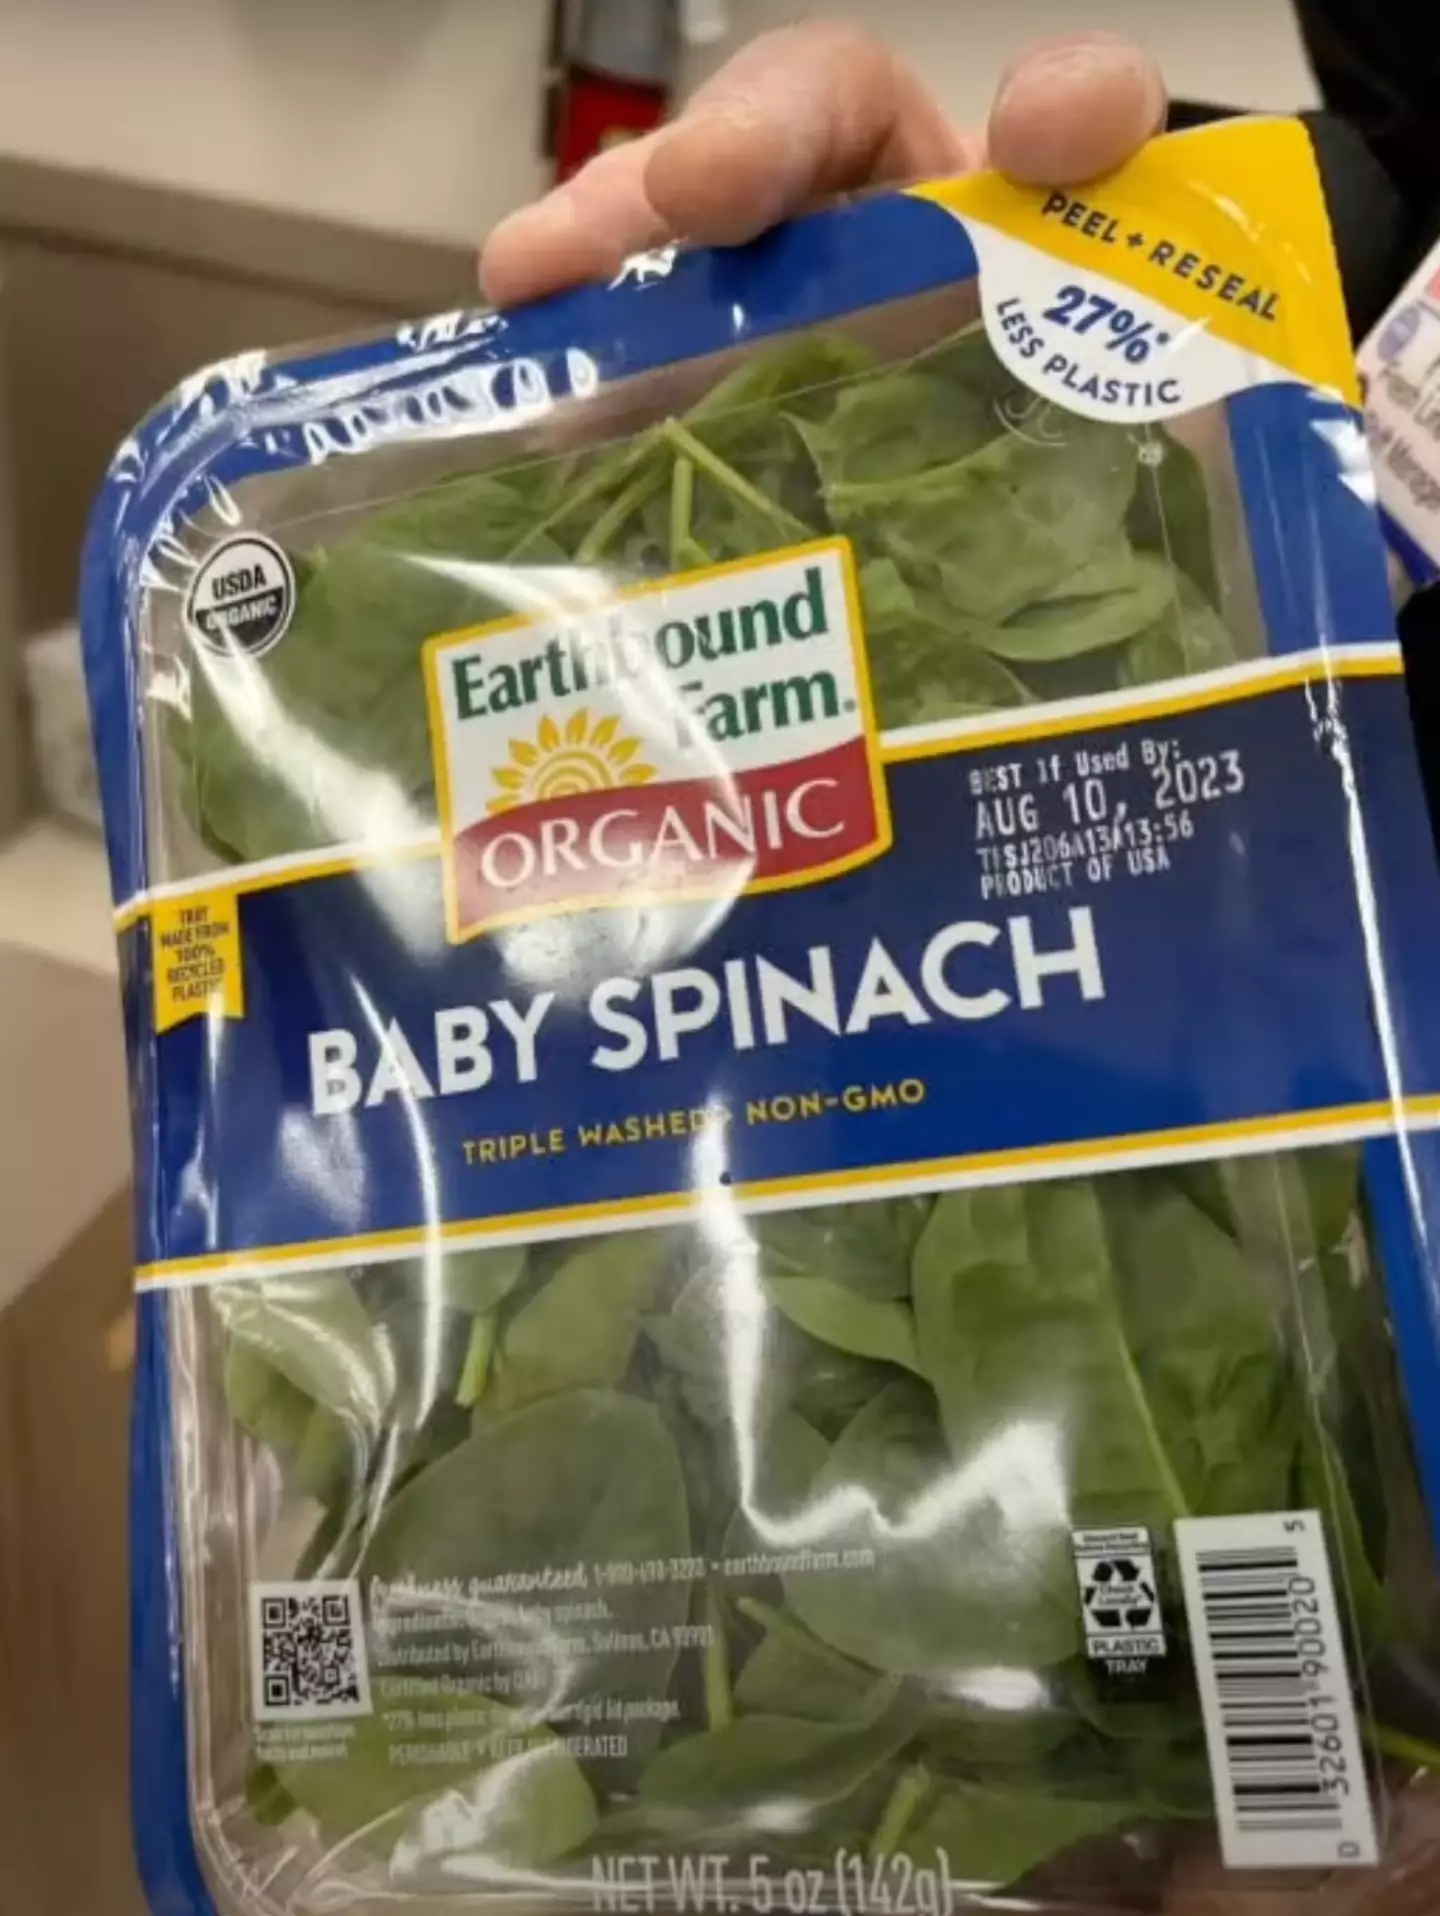 The Michigan family made a bizarre discovery in their box of 'triple washed' spinach.